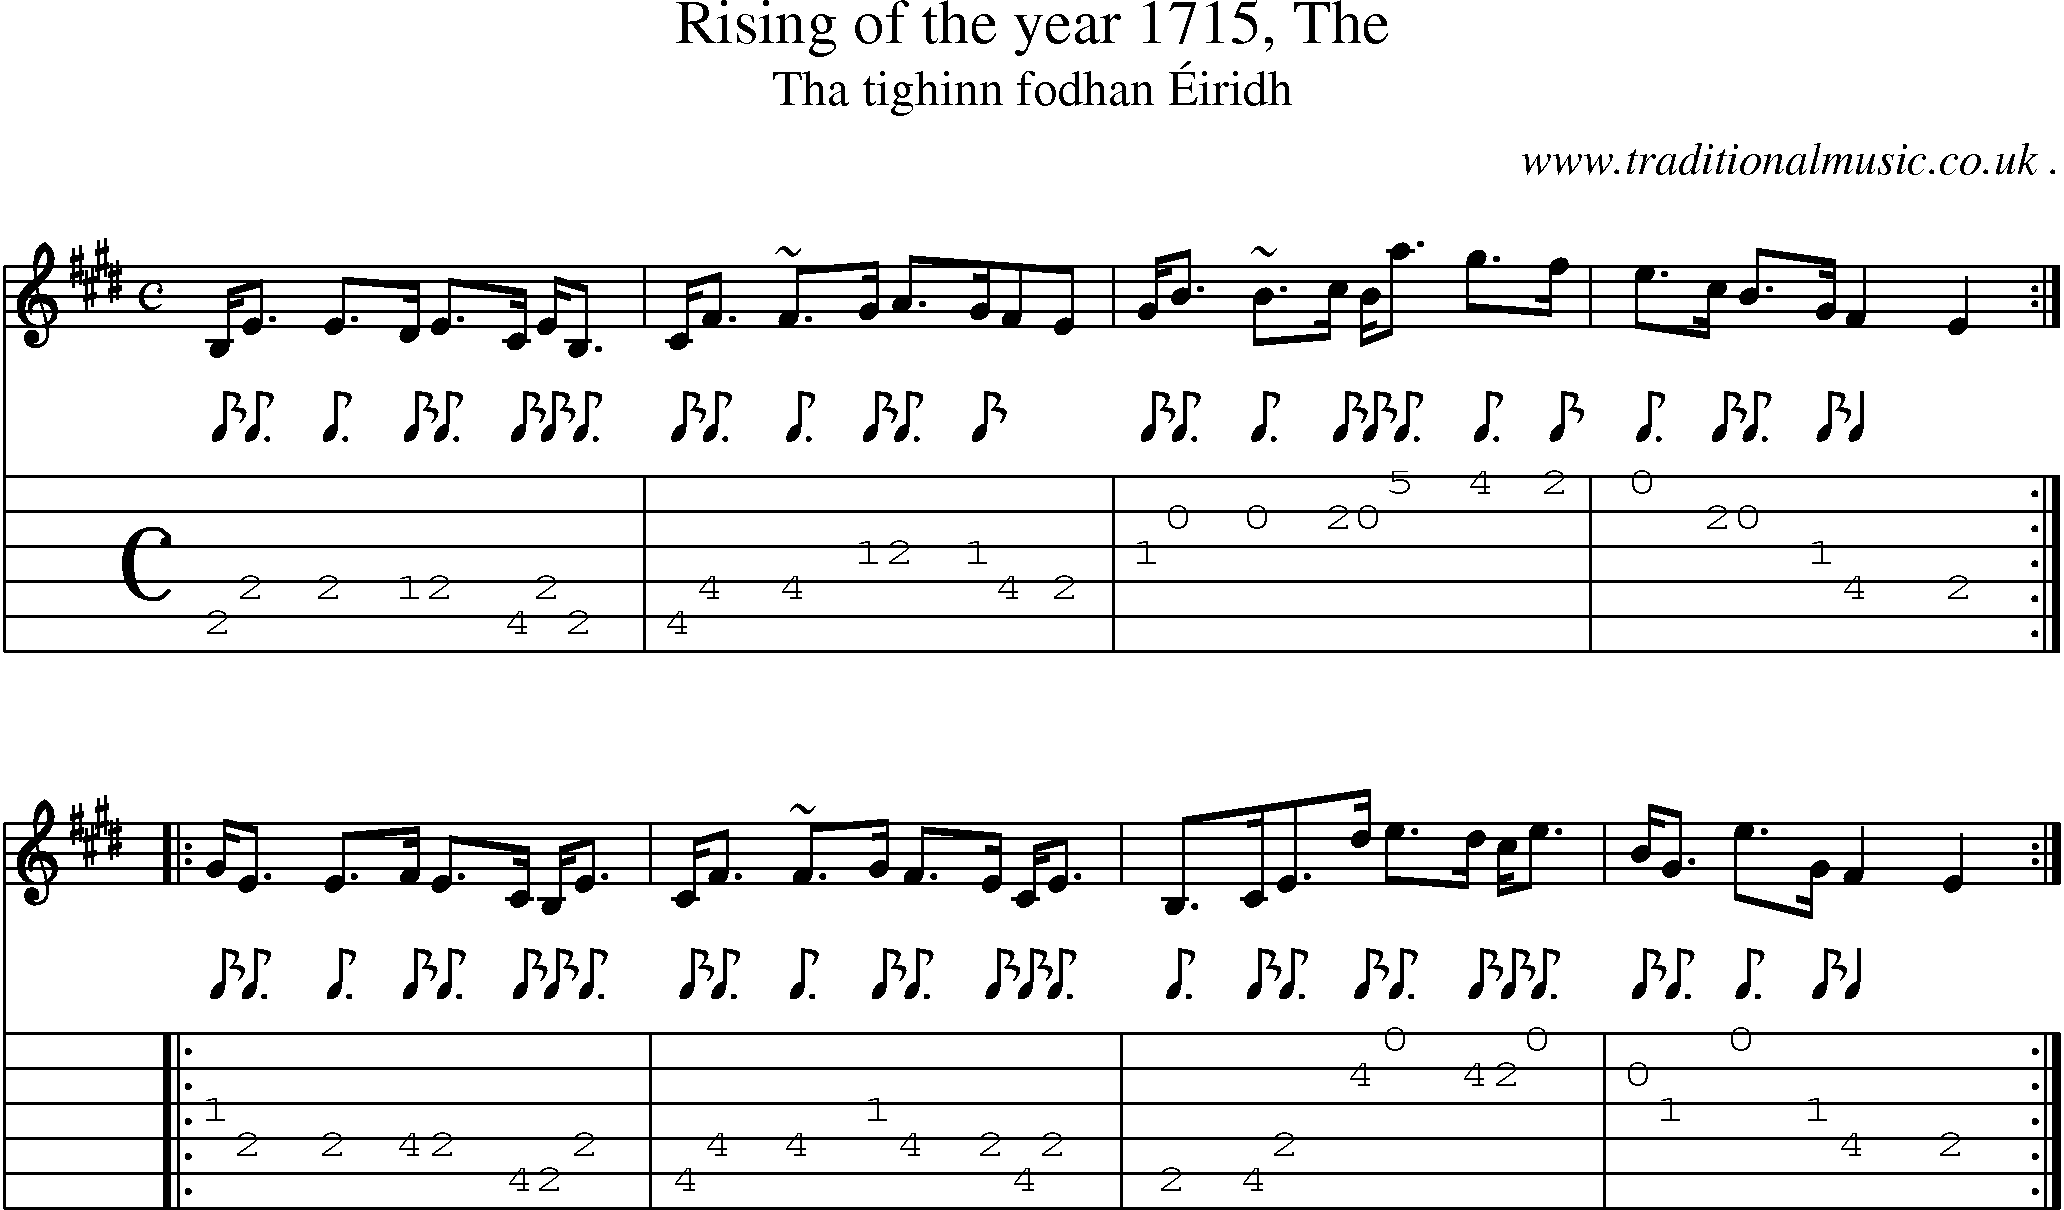 Sheet-music  score, Chords and Guitar Tabs for Rising Of The Year 1715 The